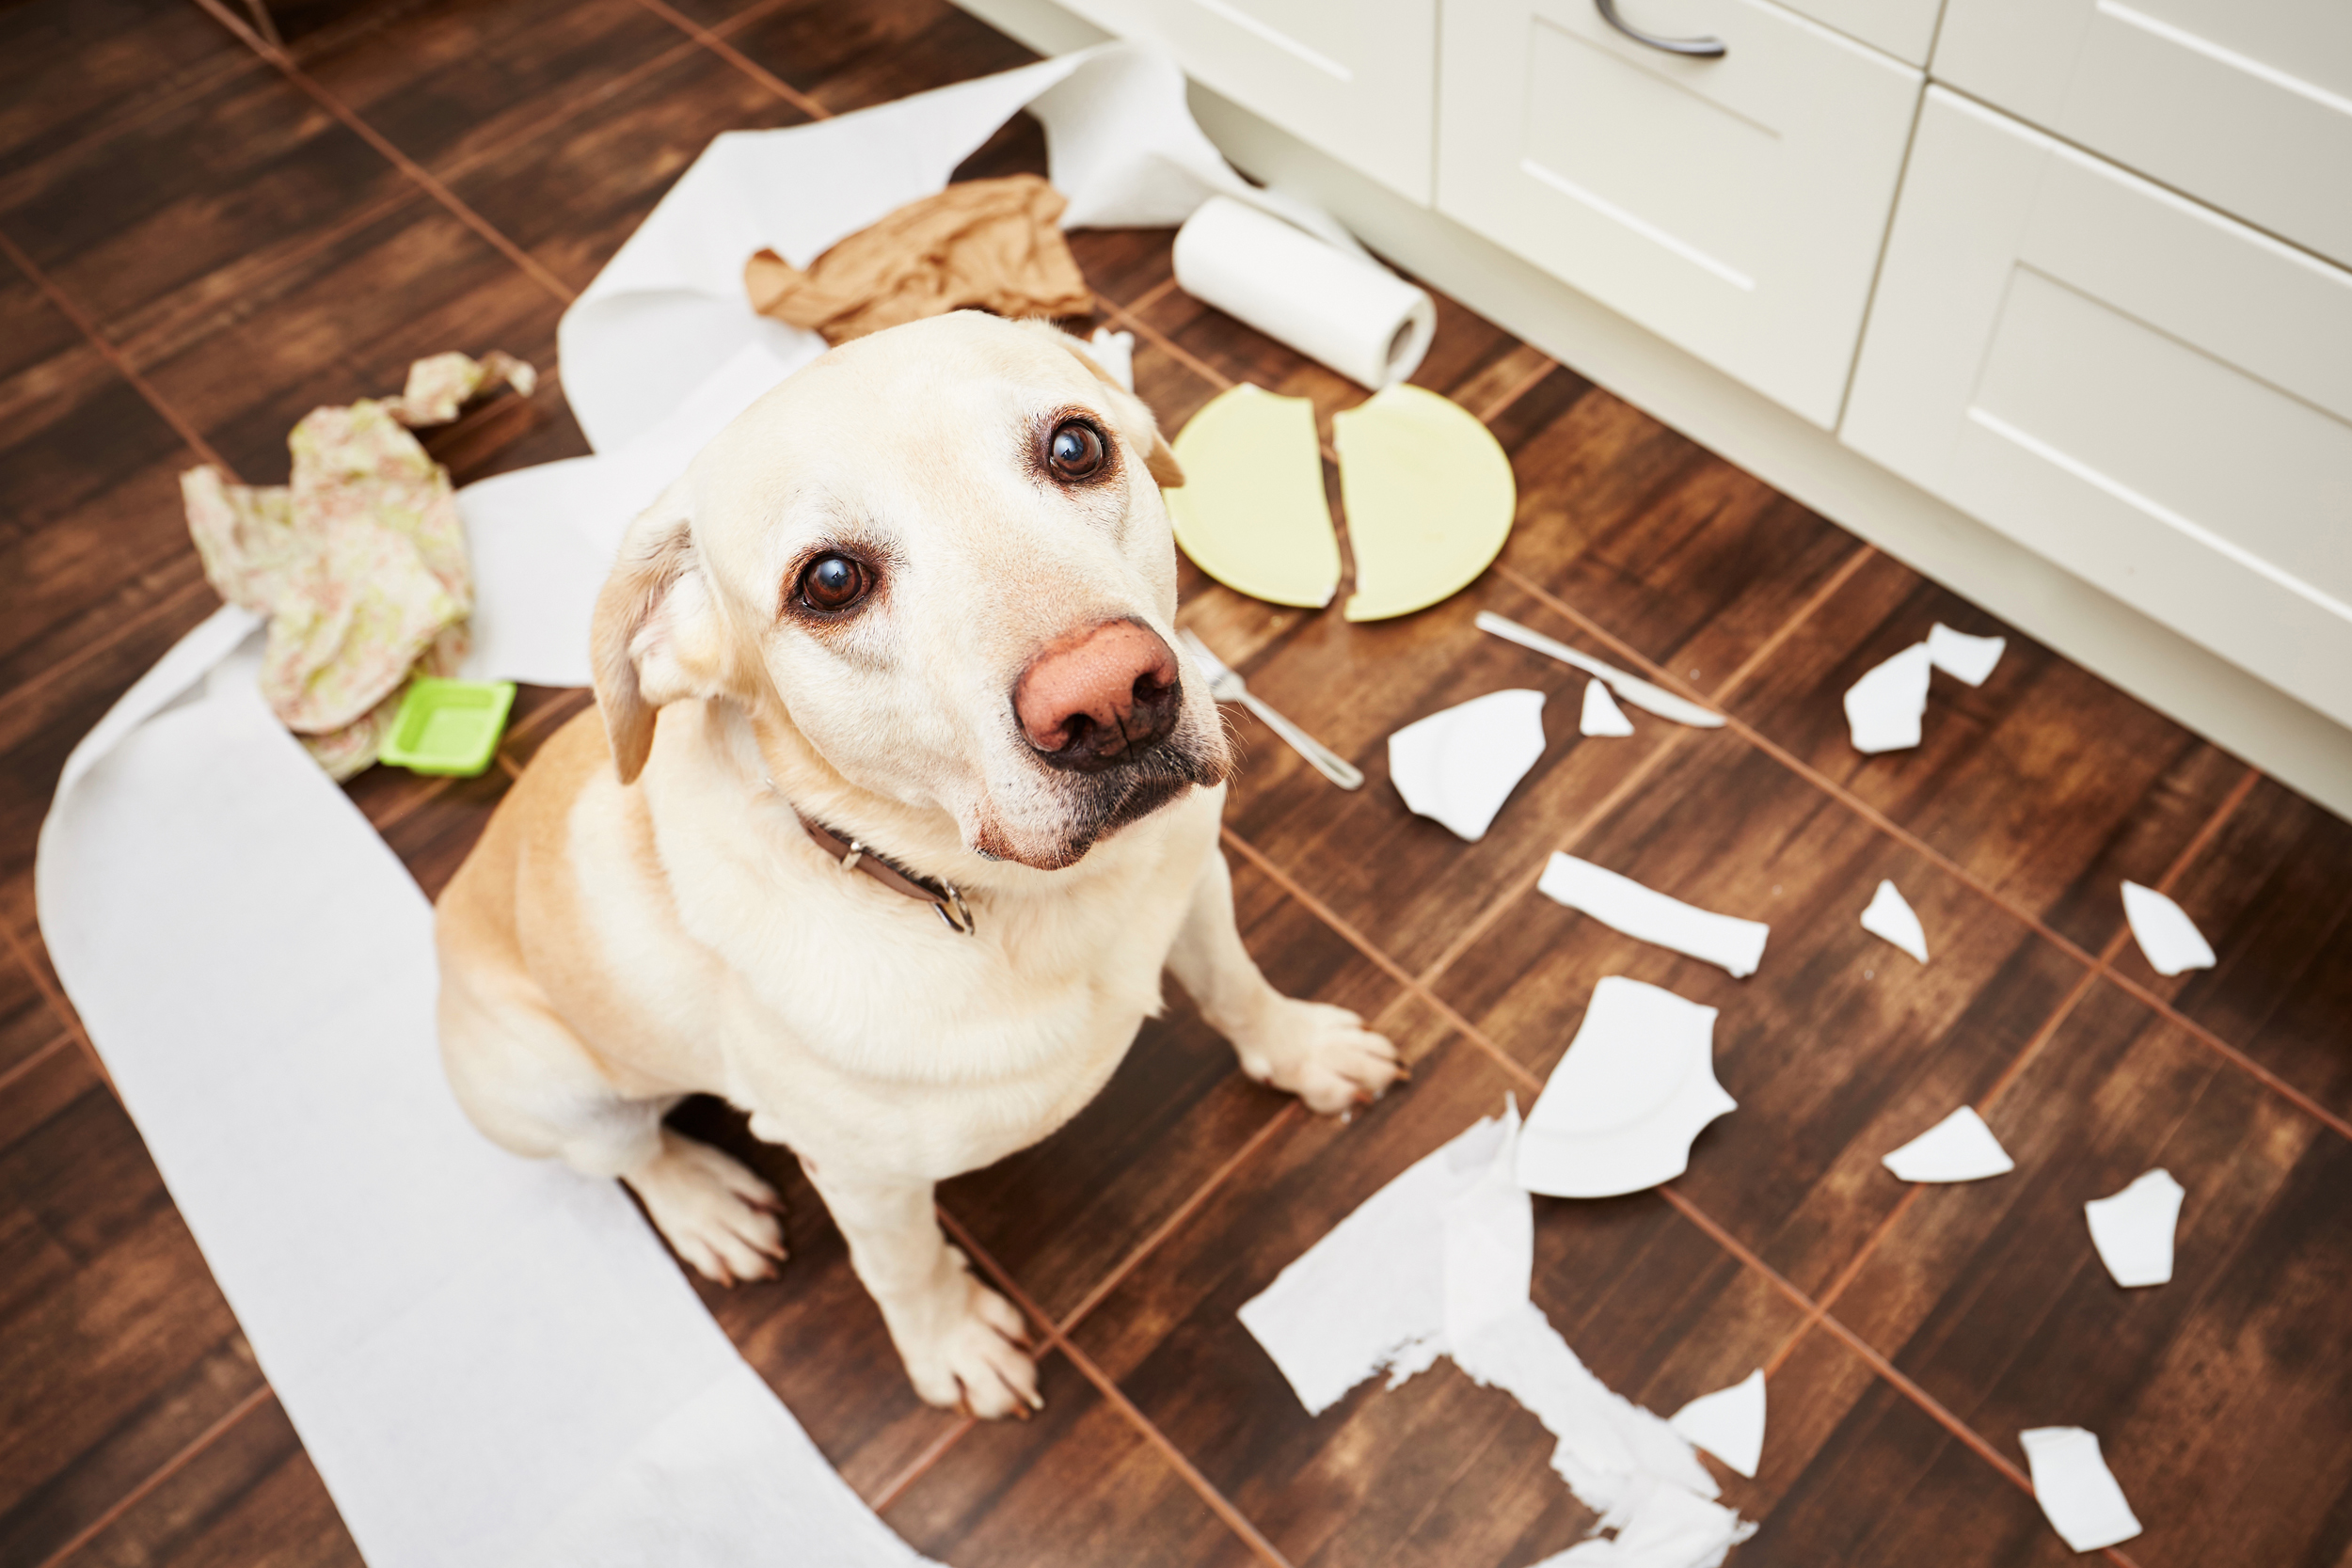 What are the common behavioural problems that dogs have?